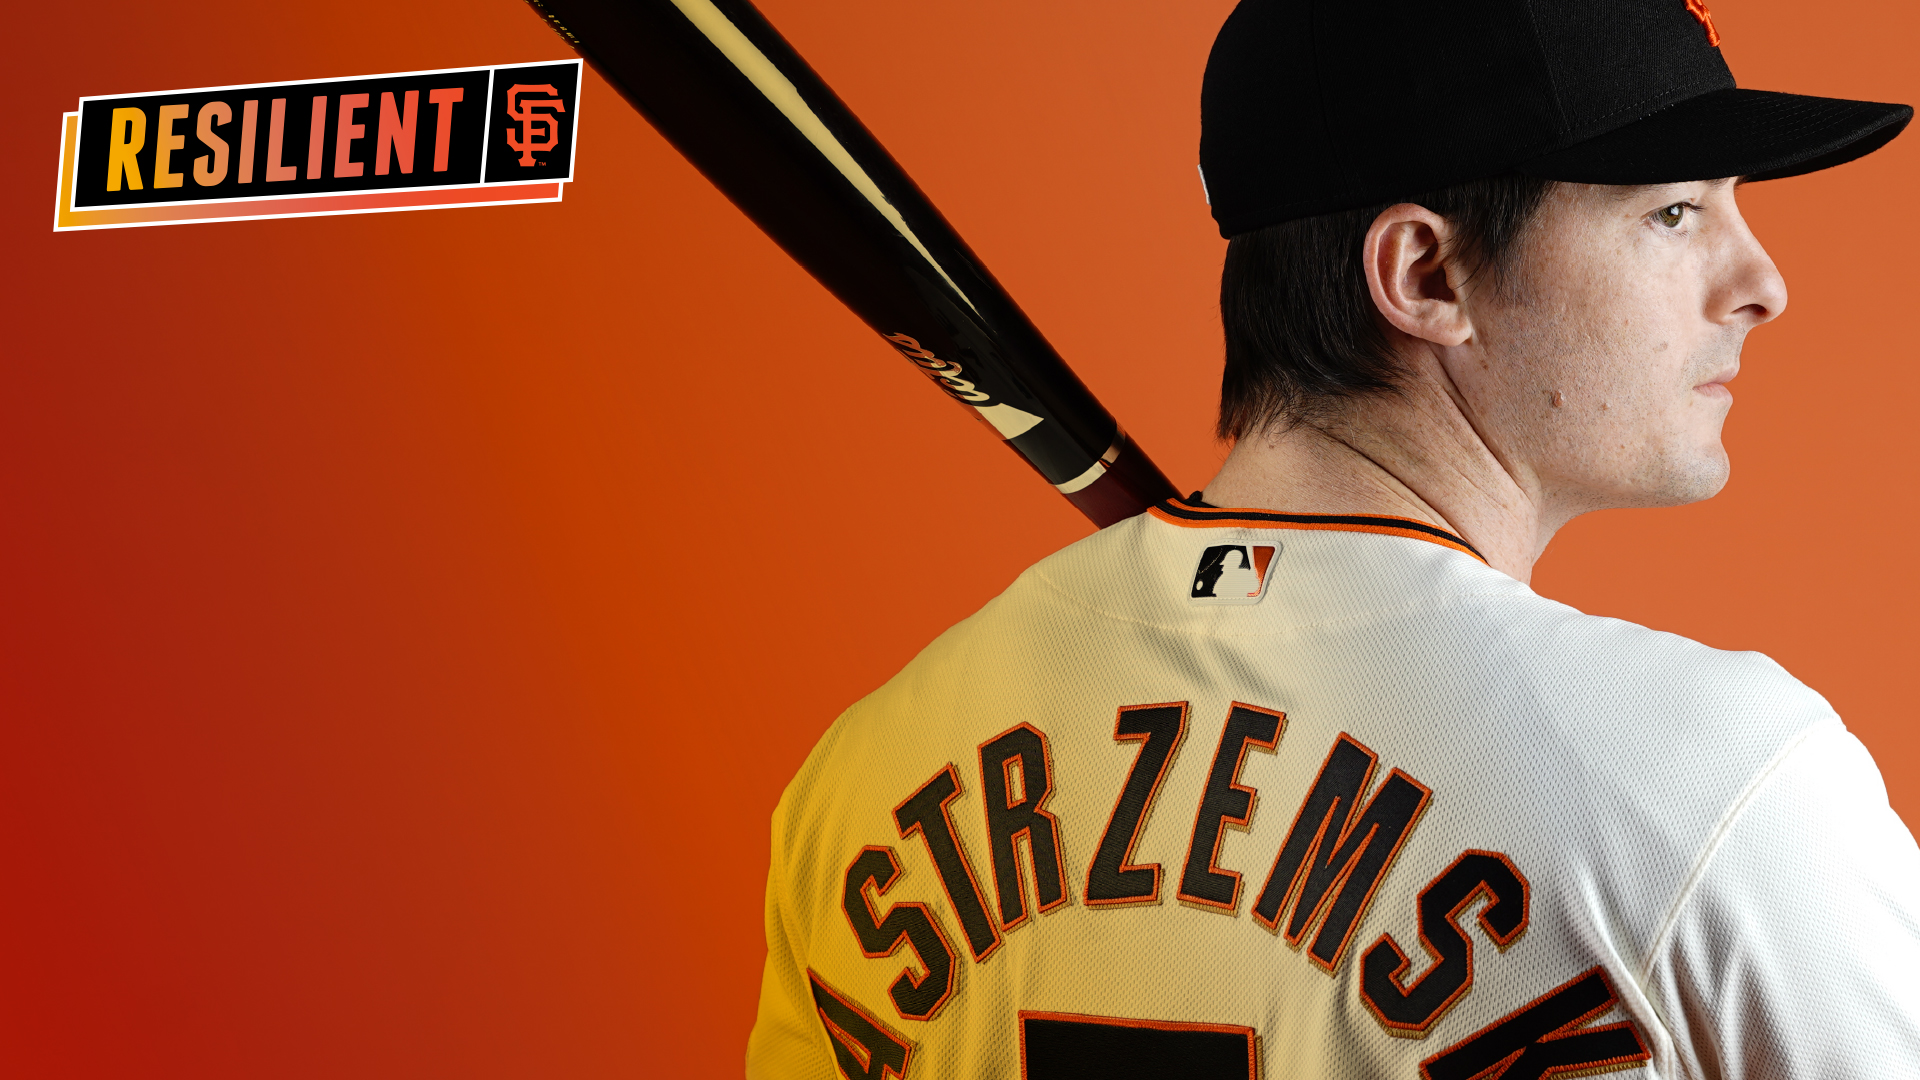 2021 SF Giants Wallpapers - Wallpaper Cave